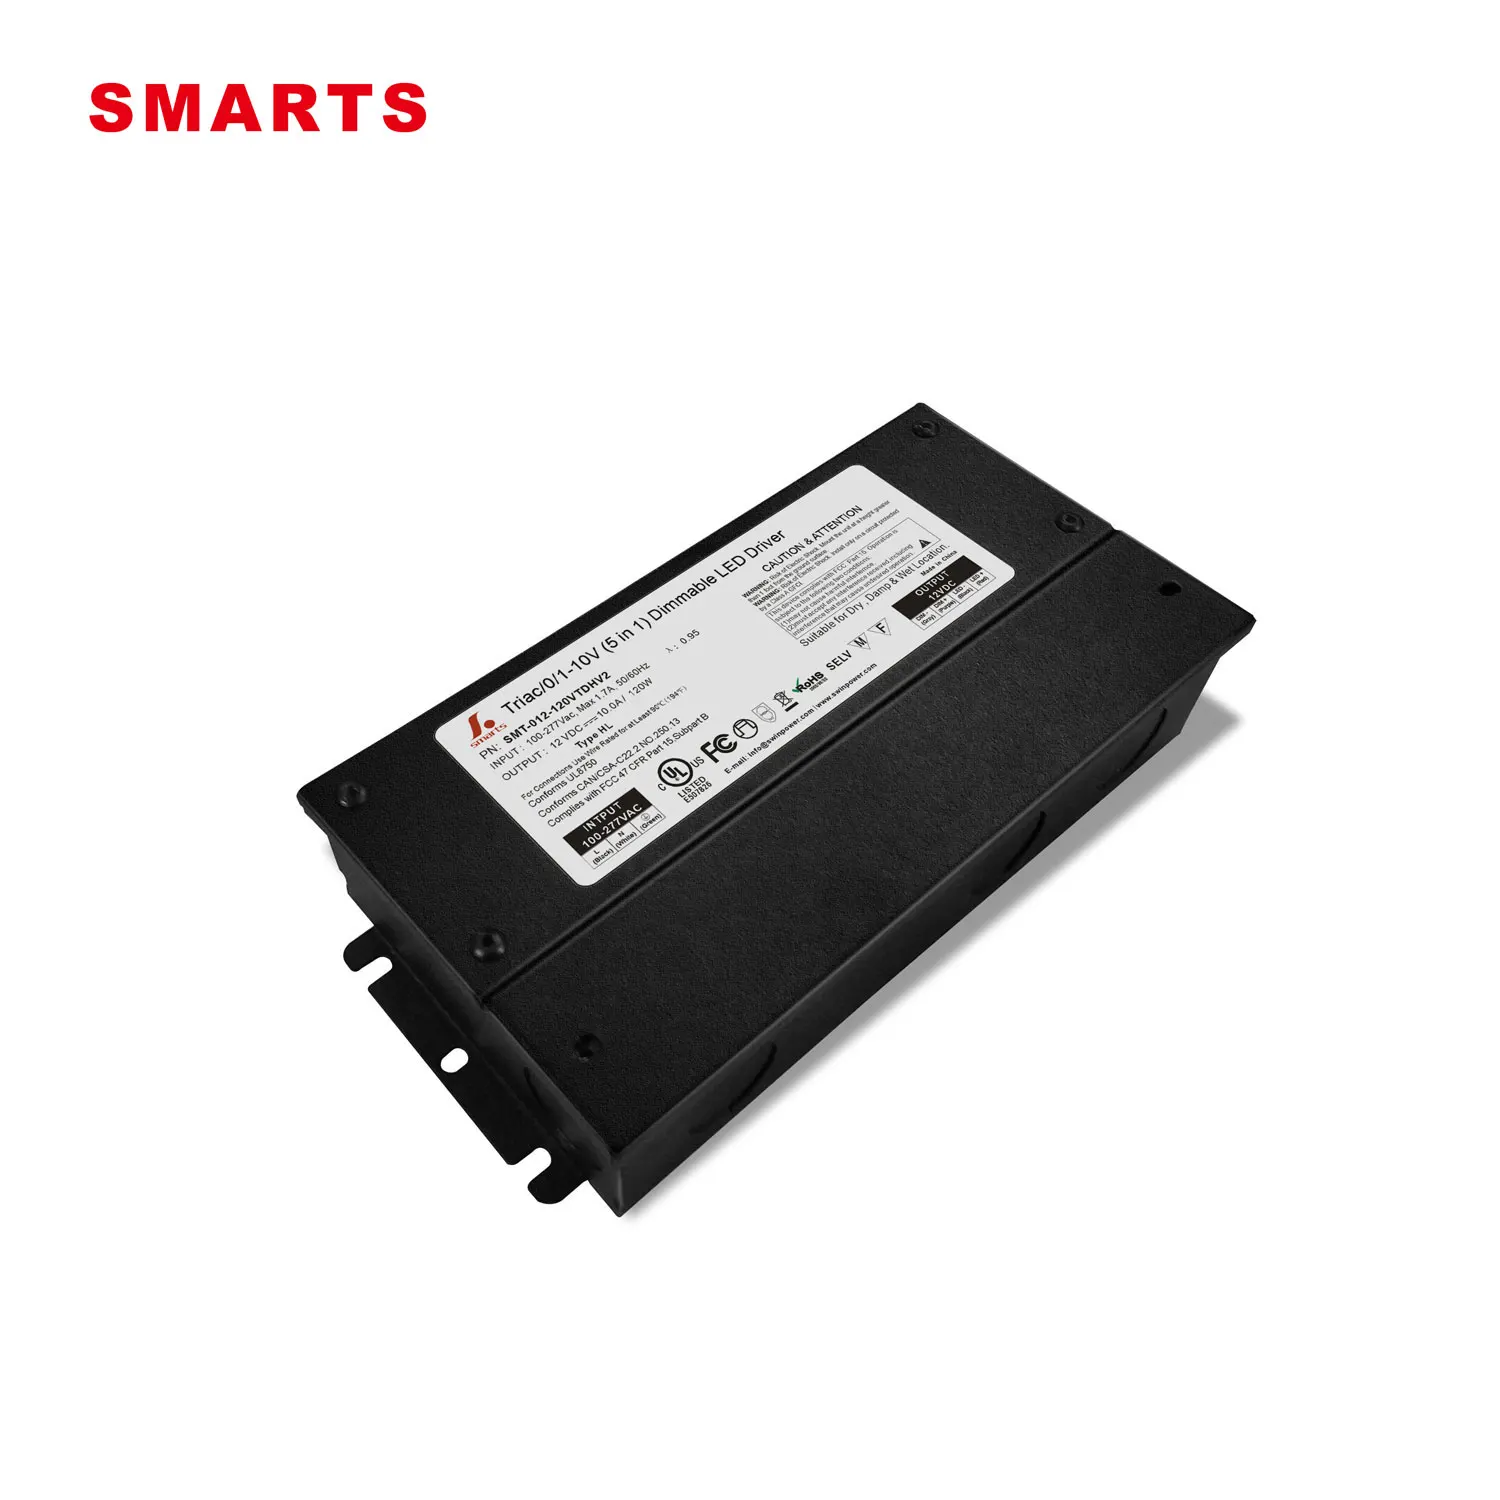 12v 120w constant voltage power supply for Led strip 5 في 1 dimmable led driver